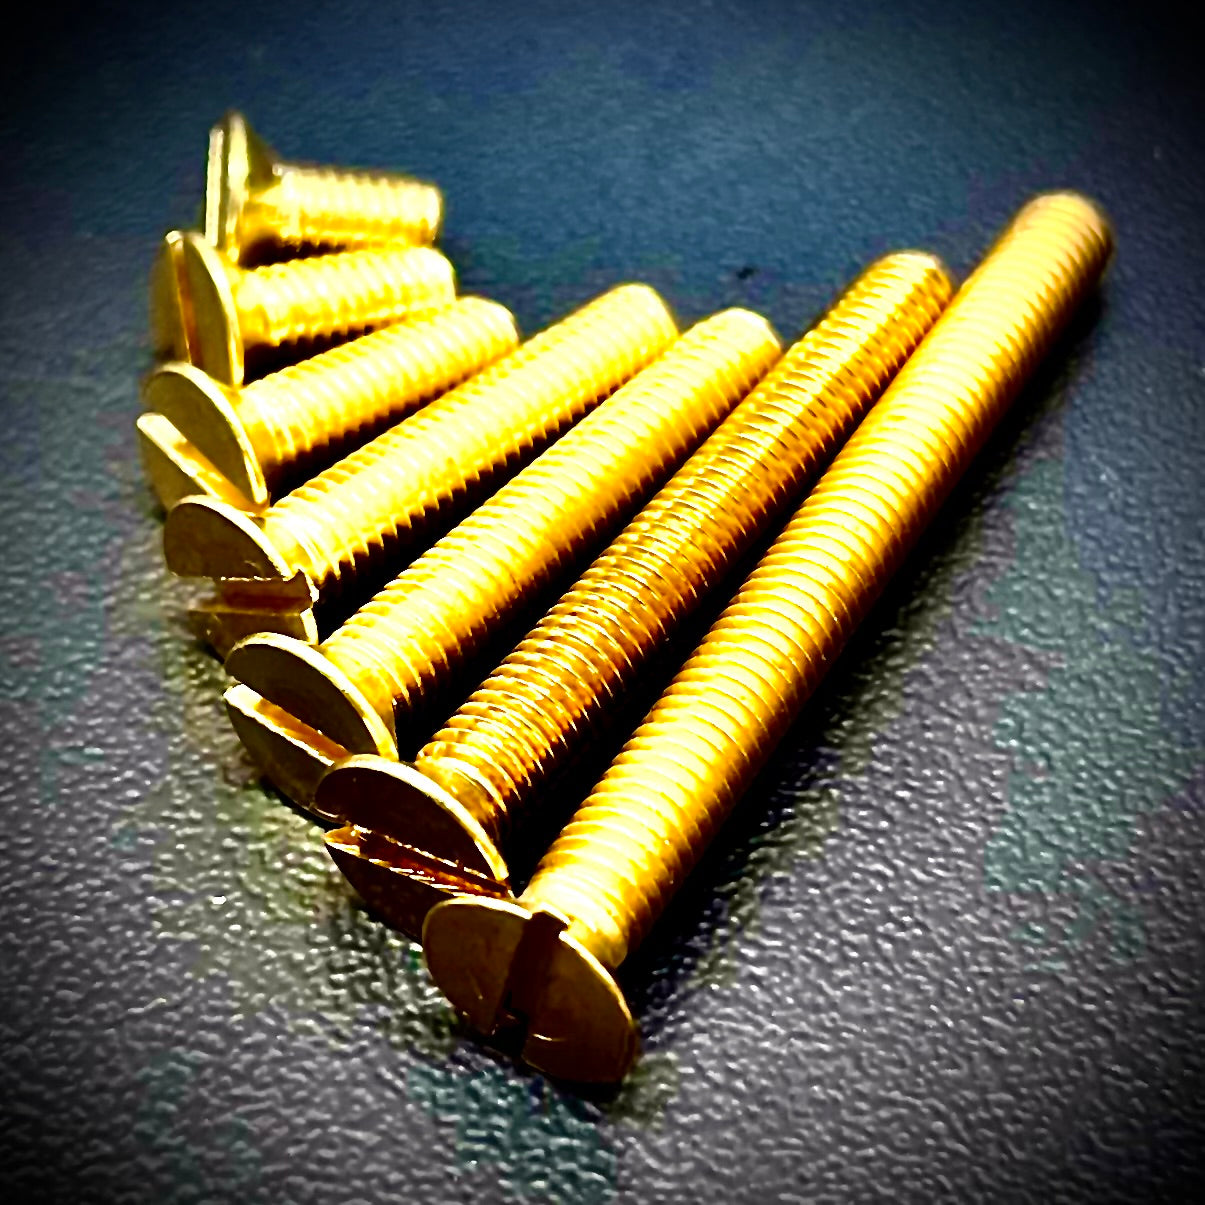 M8 Machine Screws Slotted Countersunk Brass DIN 963 - Fixaball Ltd. Fixings and Fasteners UK